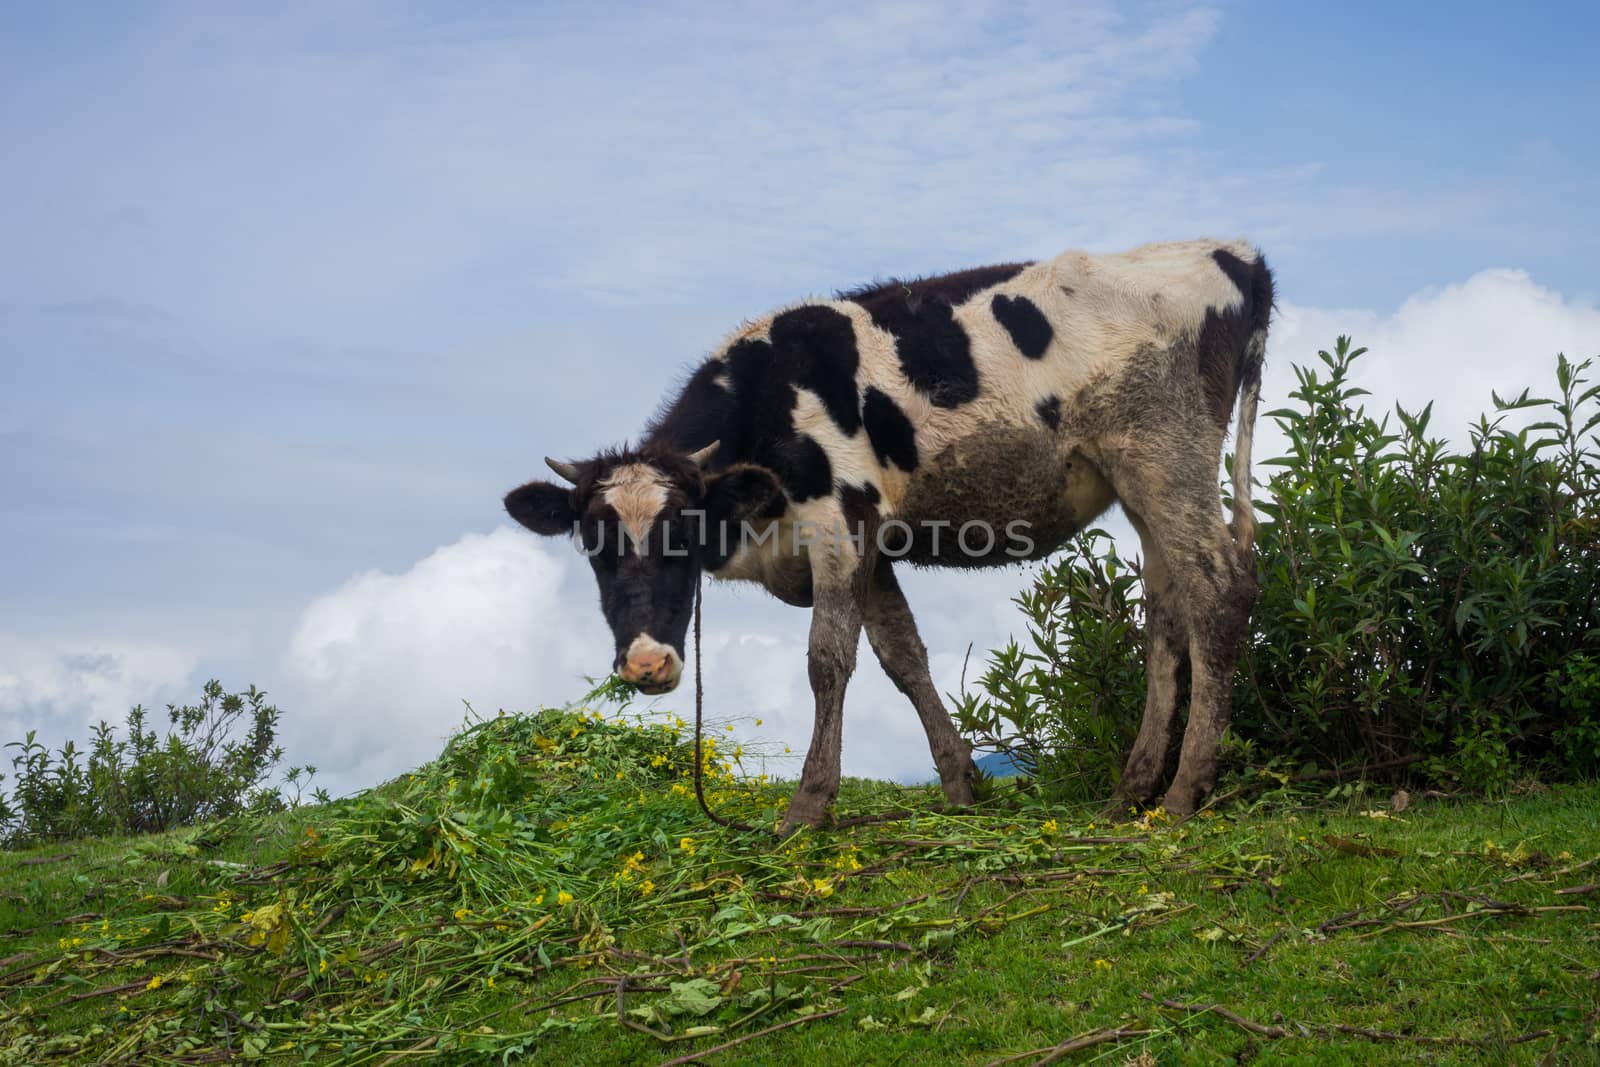 Cow in the mountains by roglopes